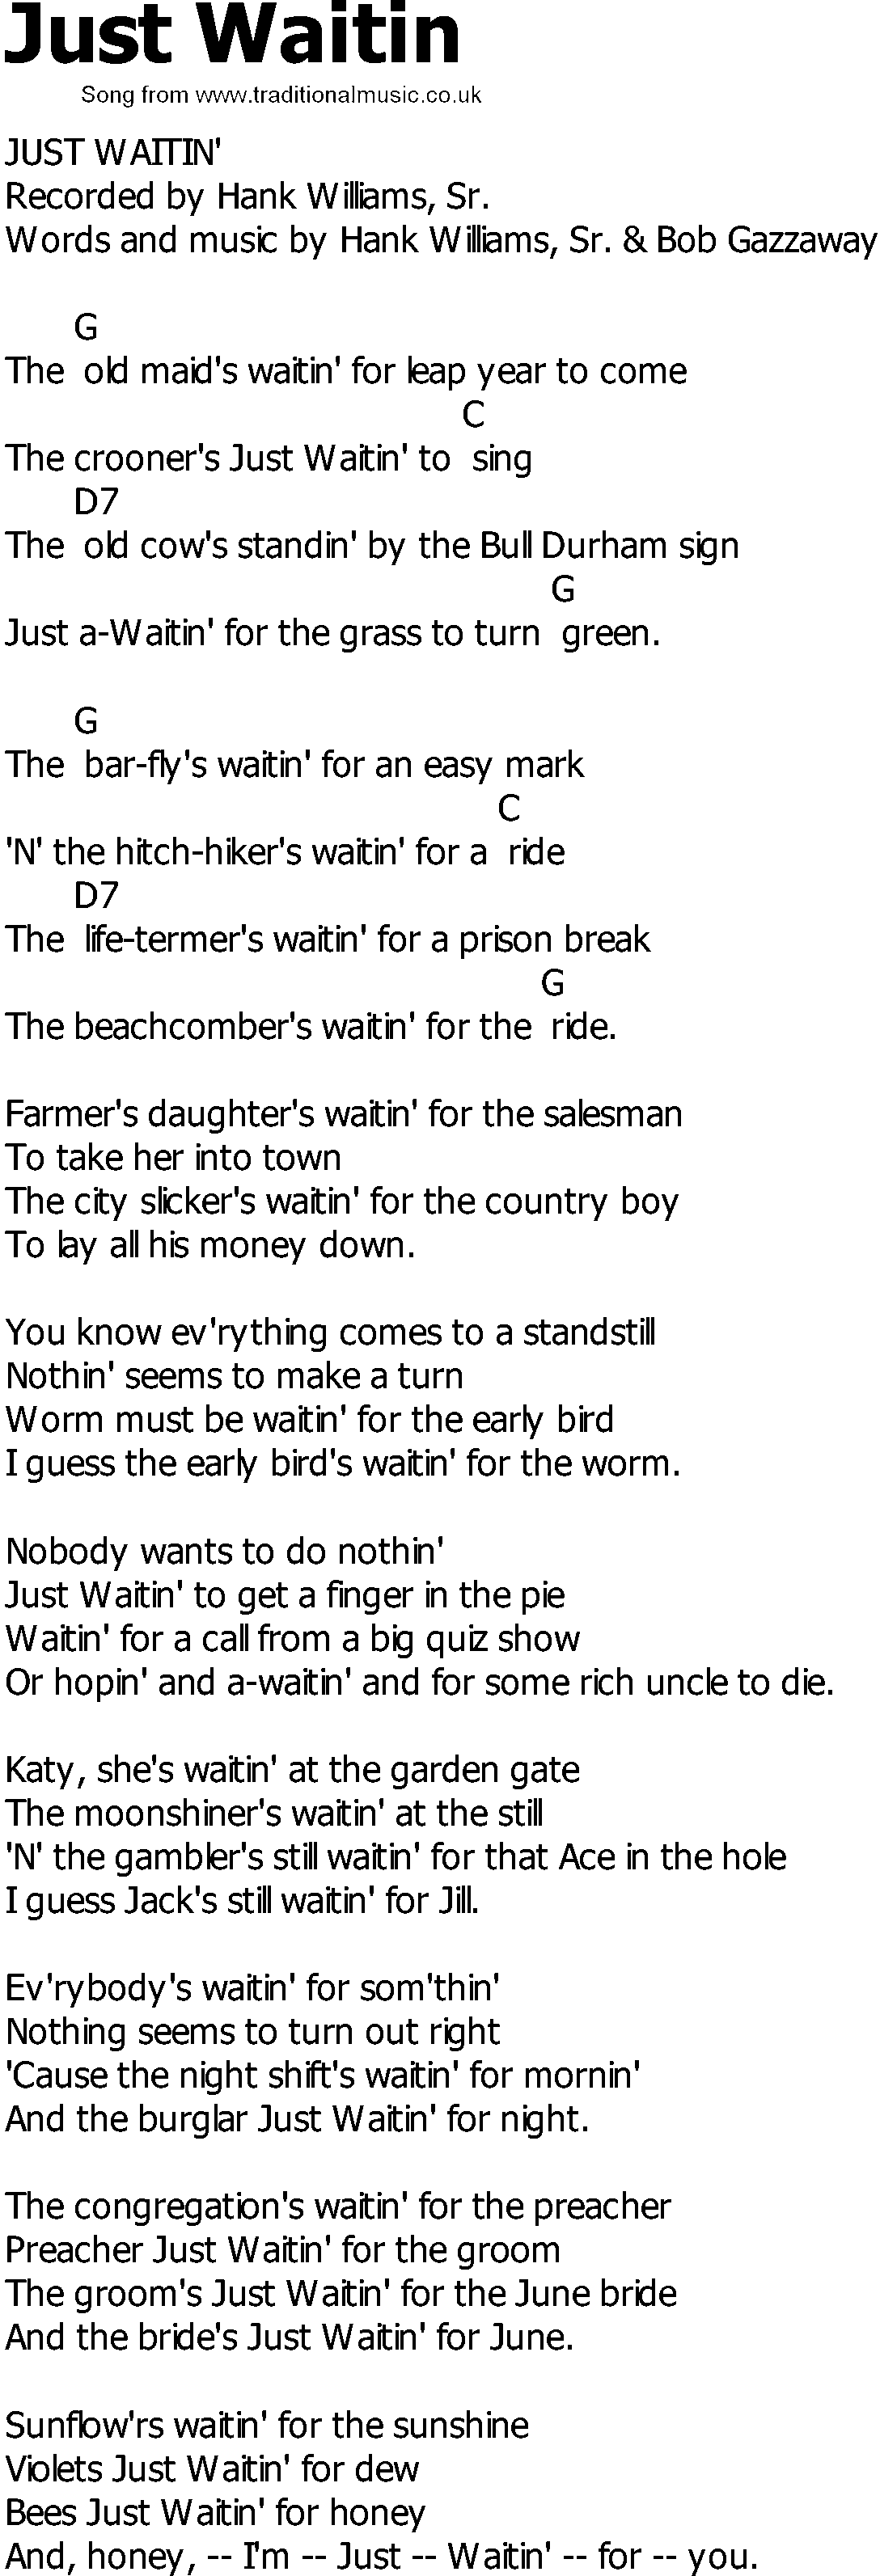 Old Country song lyrics with chords - Just Waitin